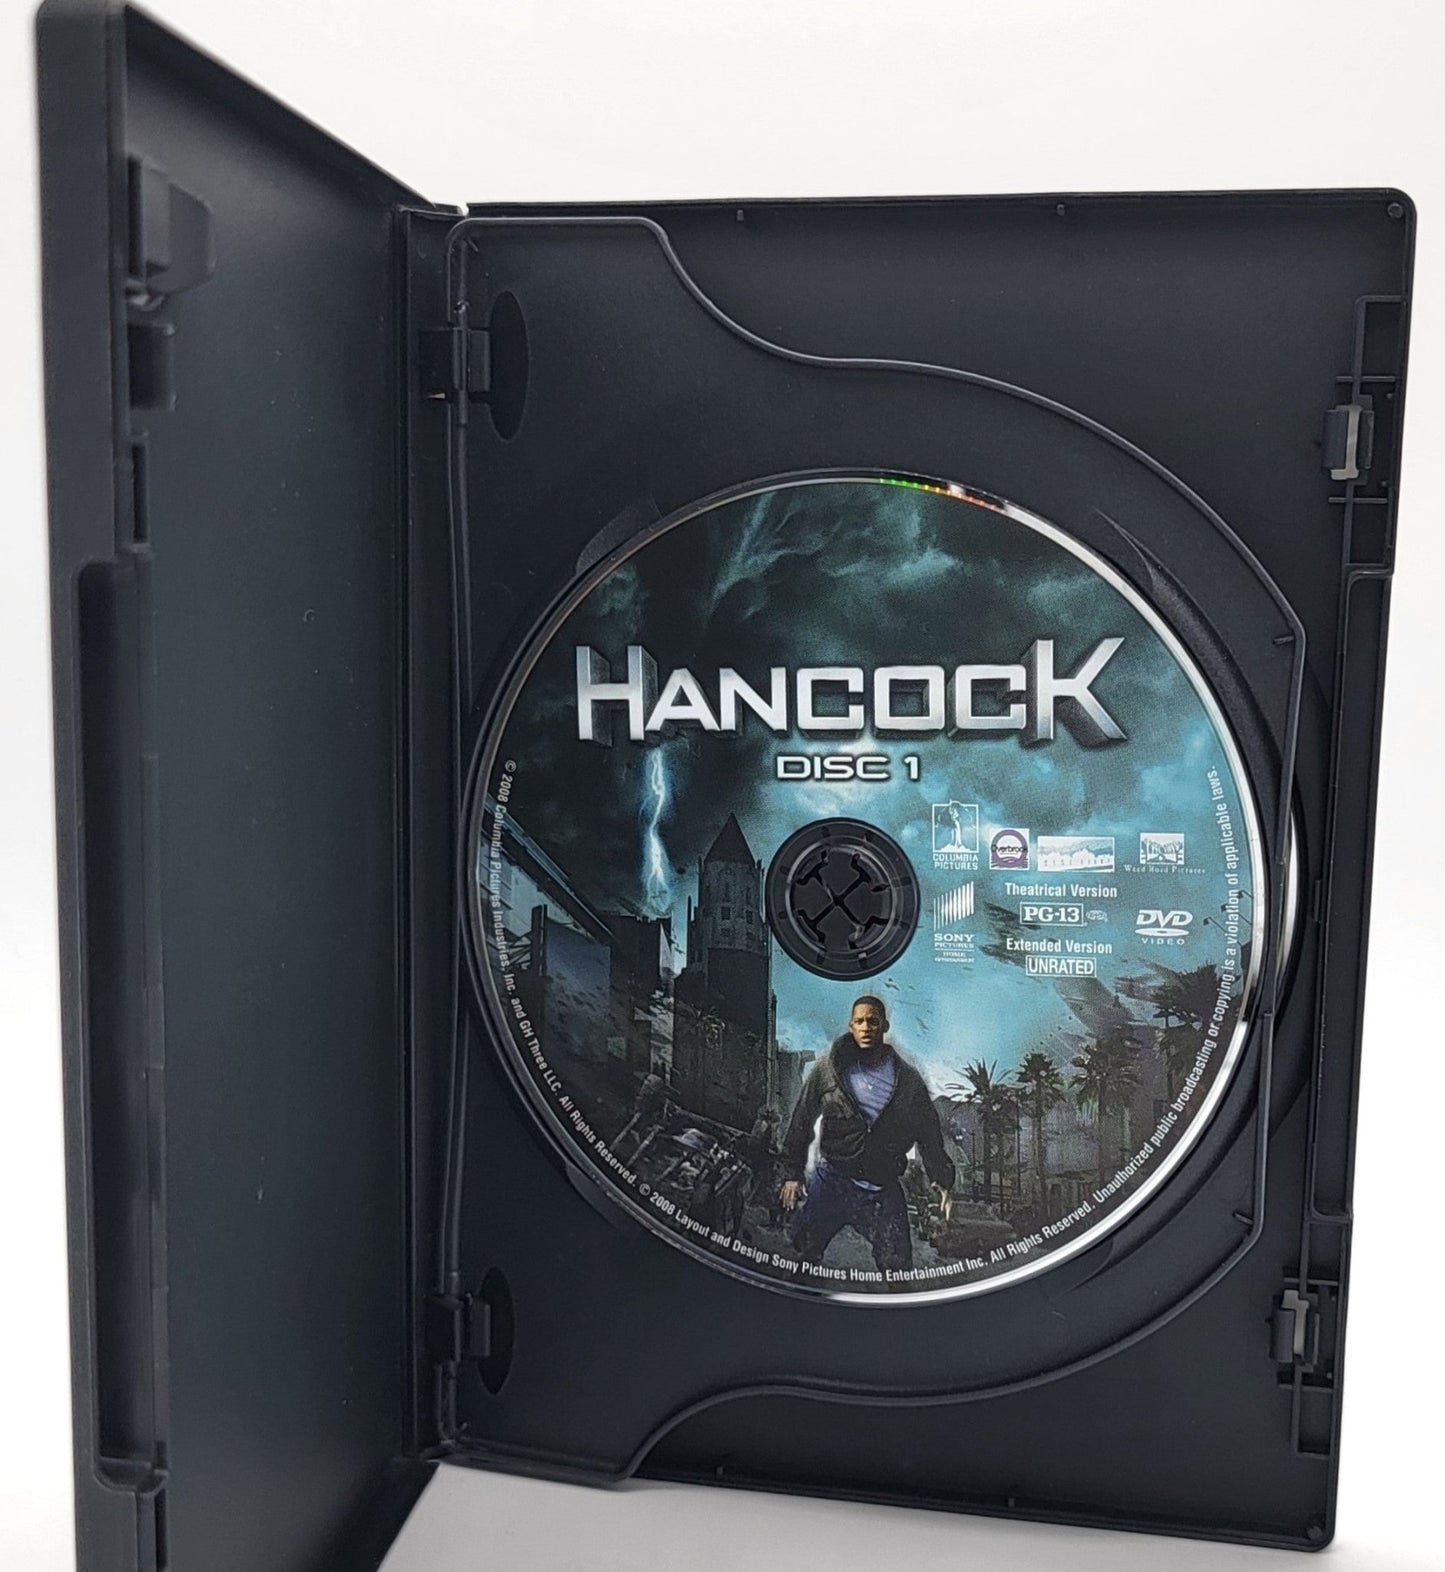 Sony Pictures Home Entertainment - Hancock | DVD | 2 Disc Unrated Special Edition - No Digital Copy - DVD - Steady Bunny Shop